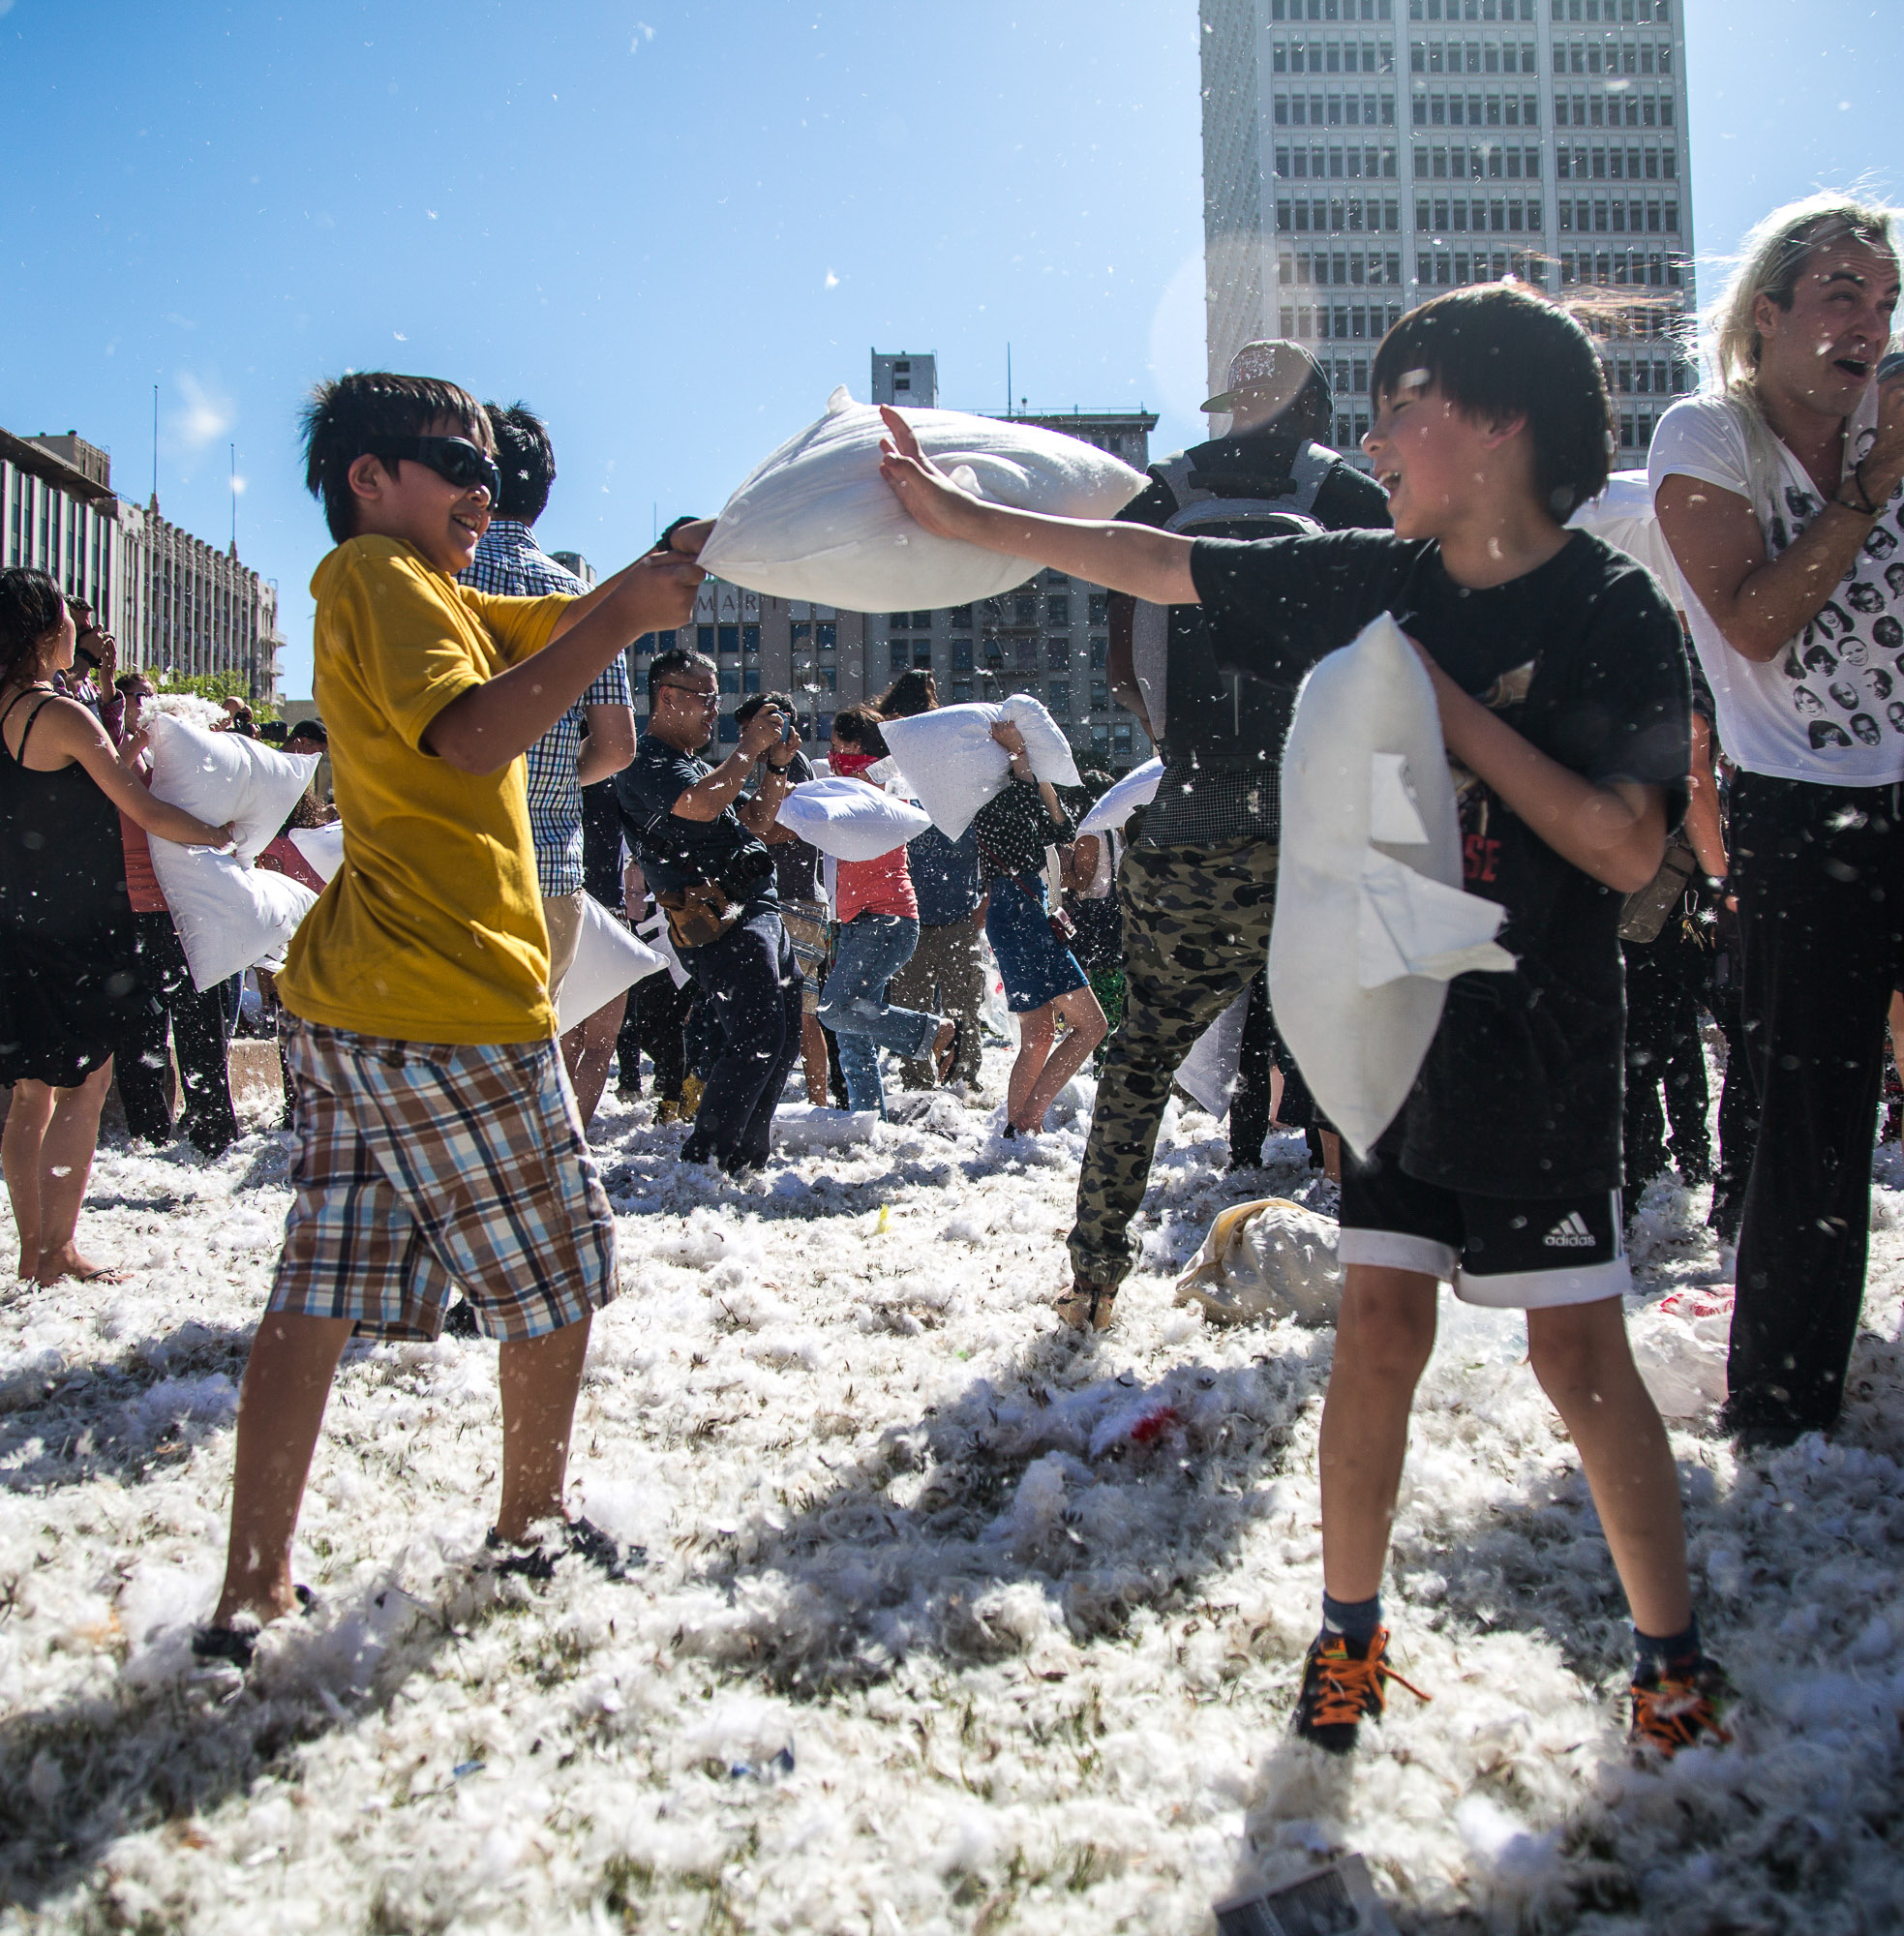  Two young pillow fight participants wage a pillow war on each other during the International Pillow Fight Day in Pershing Square in Downtown Los Angles on Saturday, April 1 2017. Hundreds of people traded soft blows in a giant pillow fight that dwar